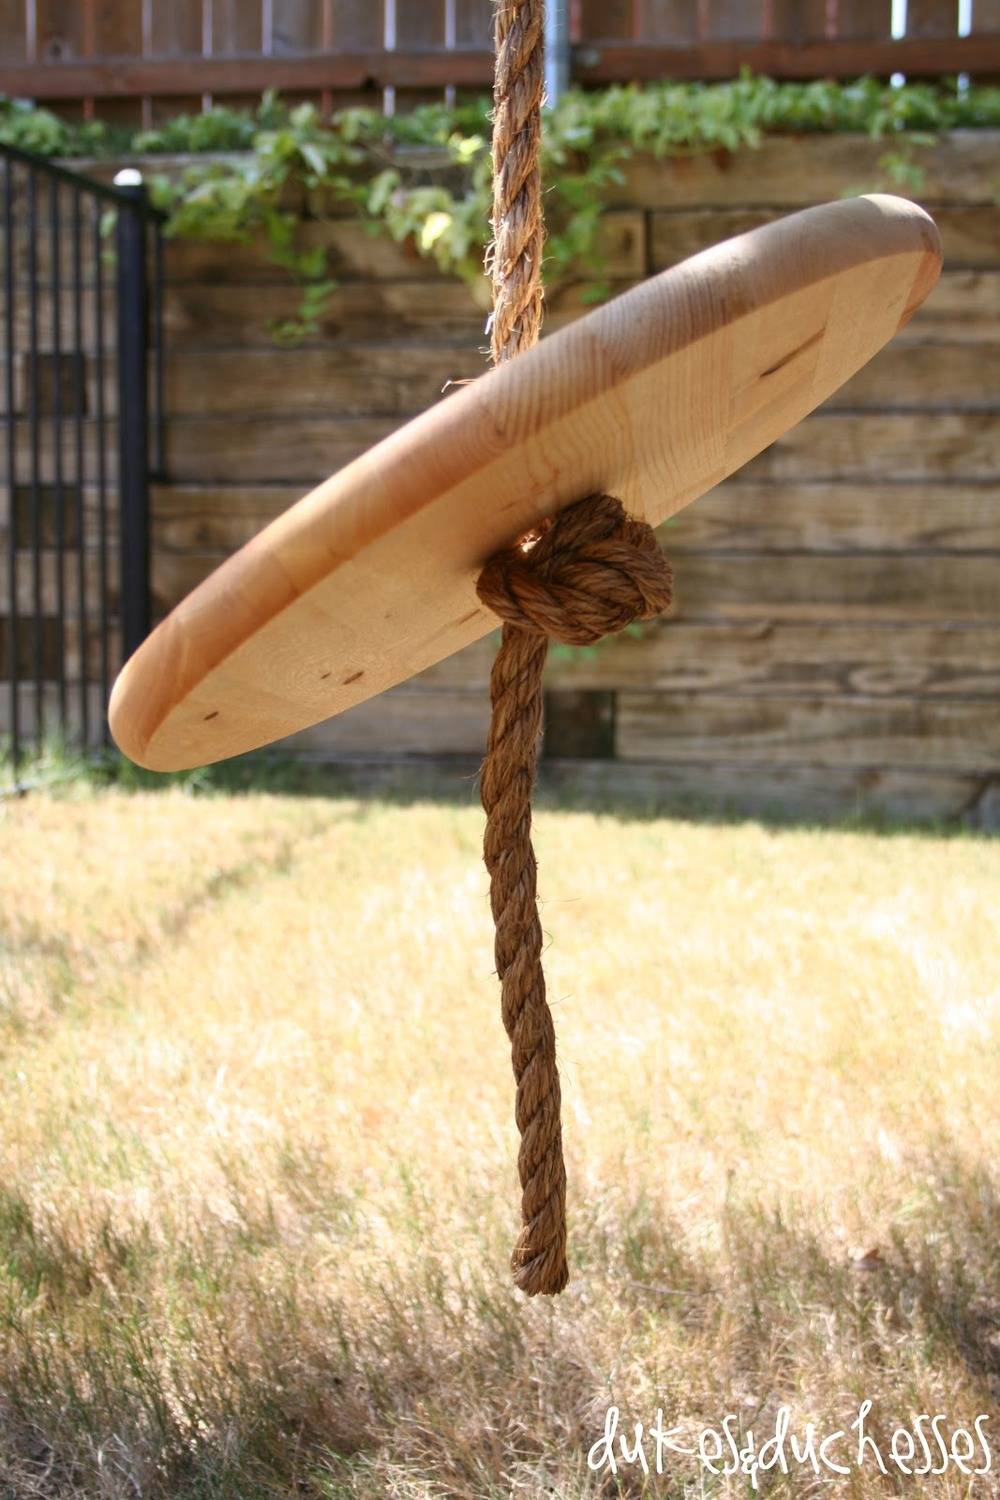 A round wooden disk of a swing is hanging from a rope.